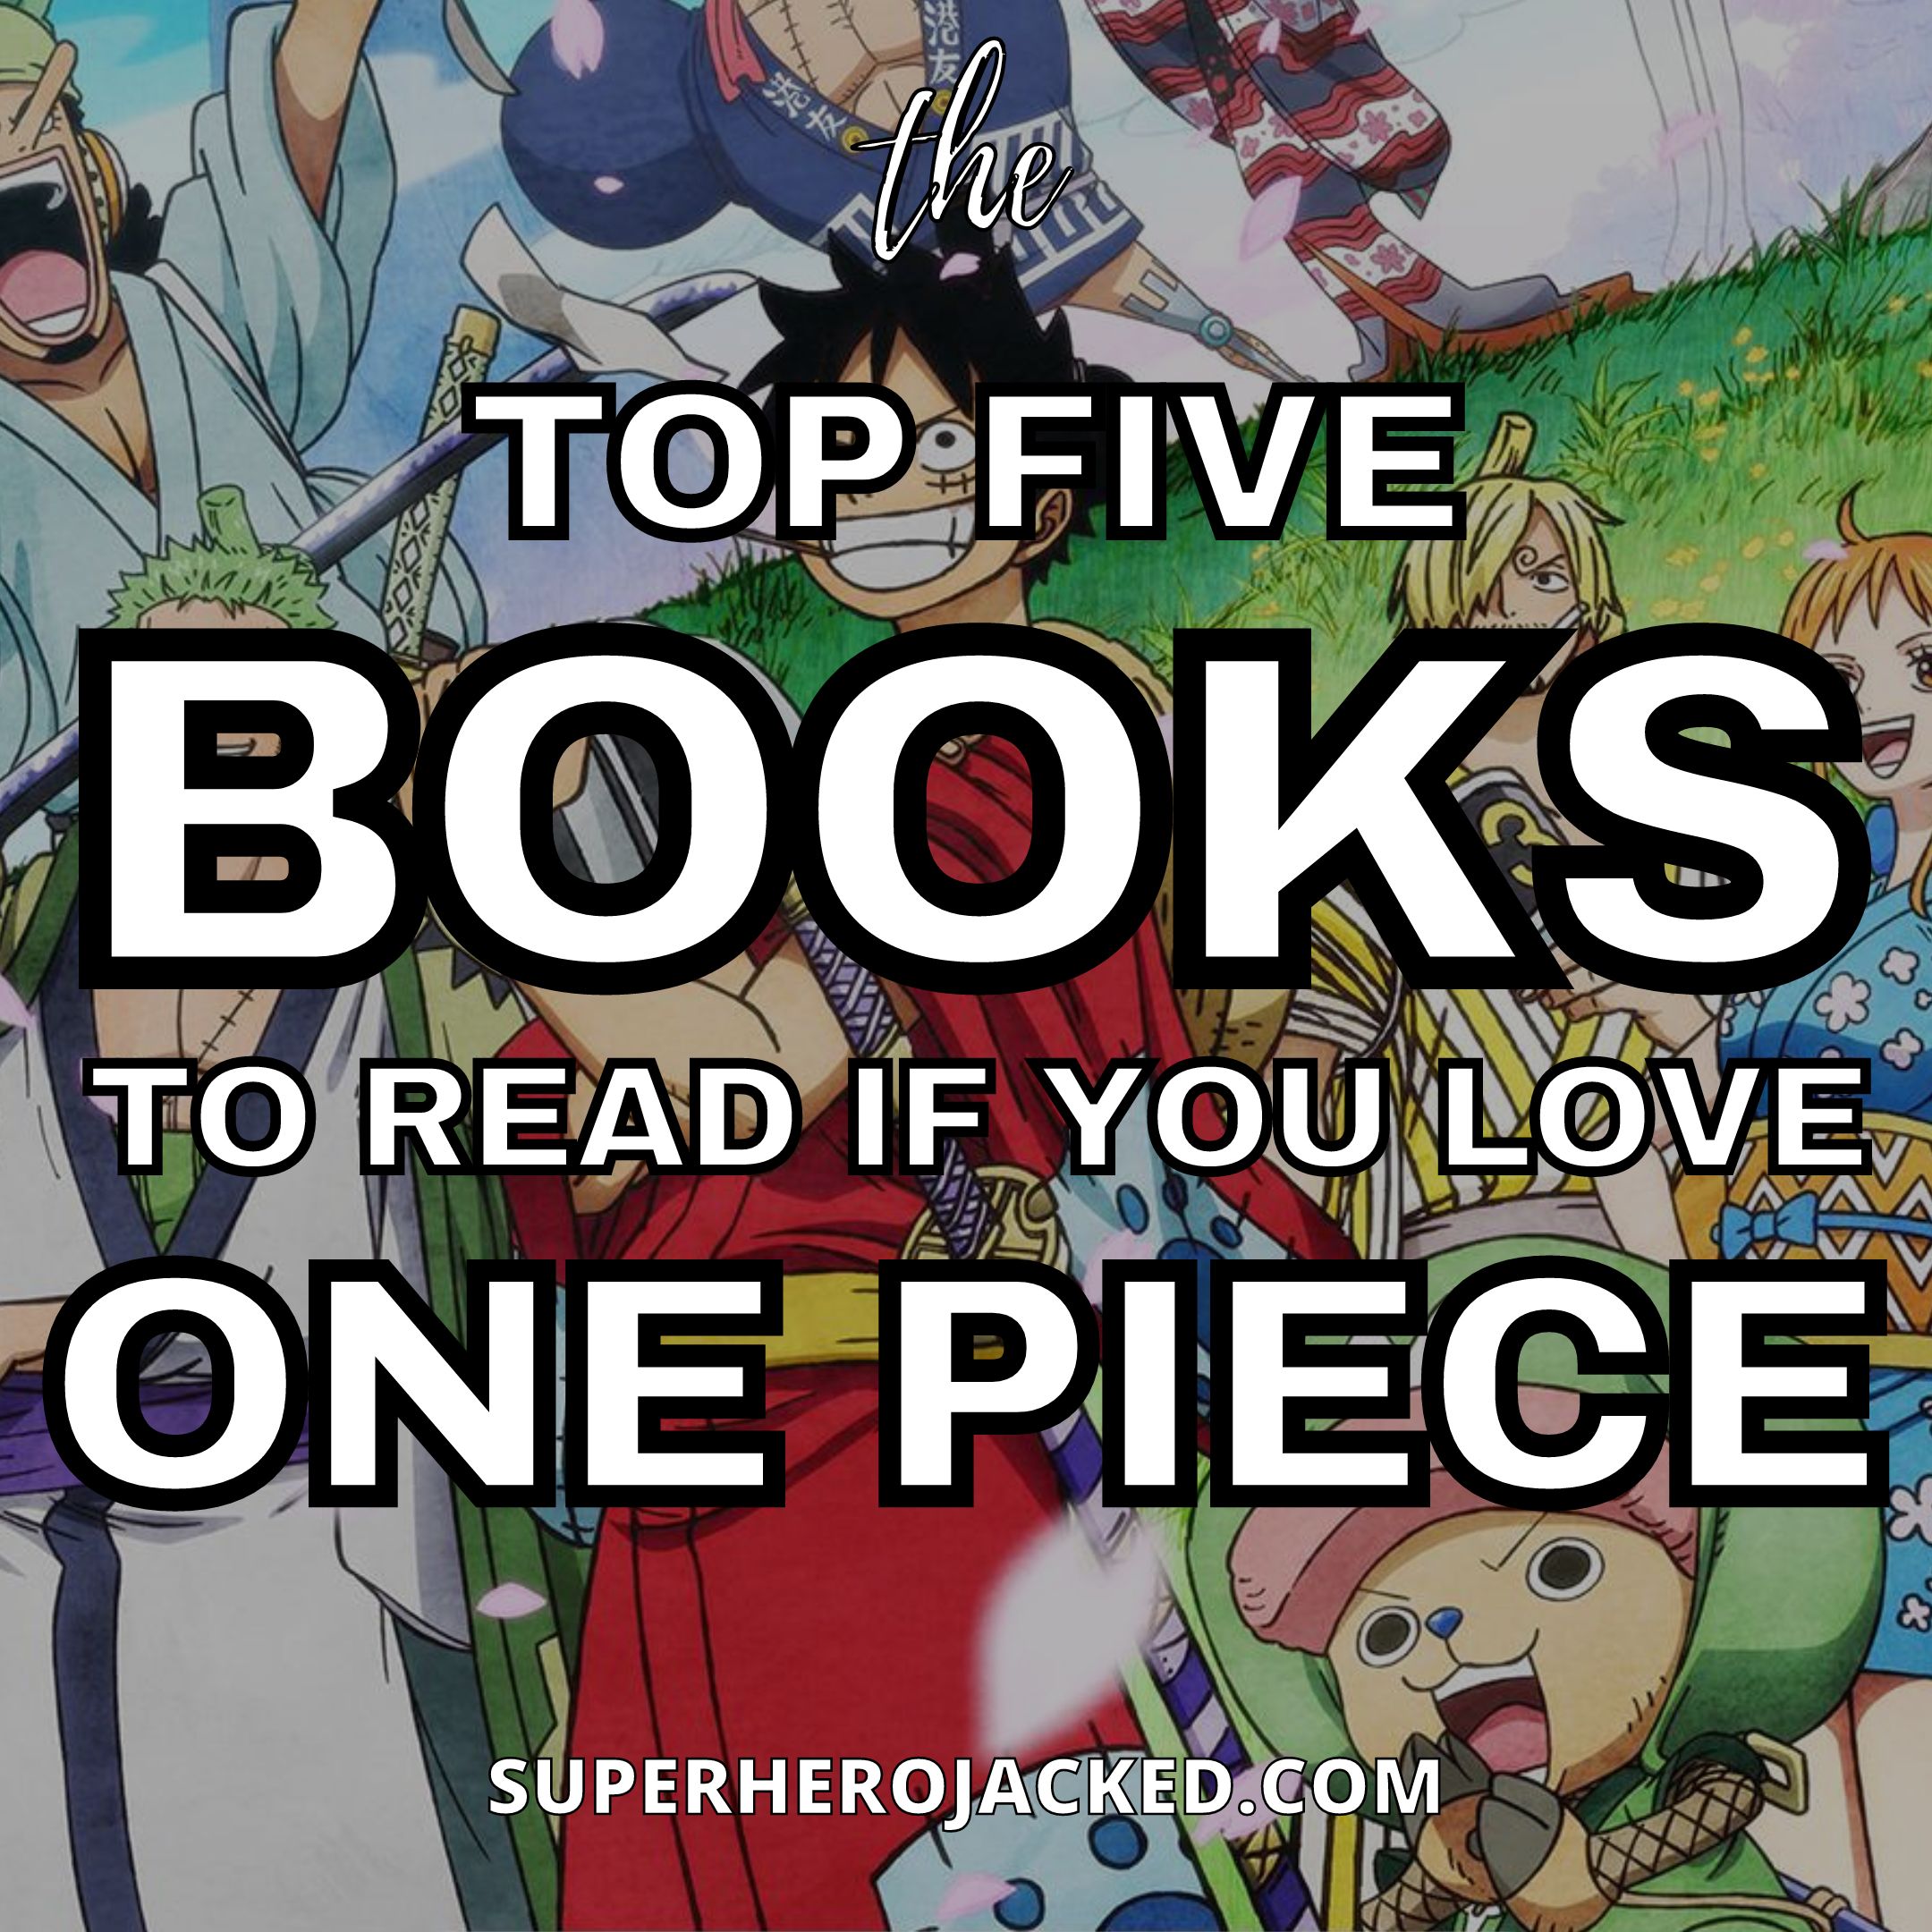 One Piece: 4 reasons why anime watchers should read the manga (and